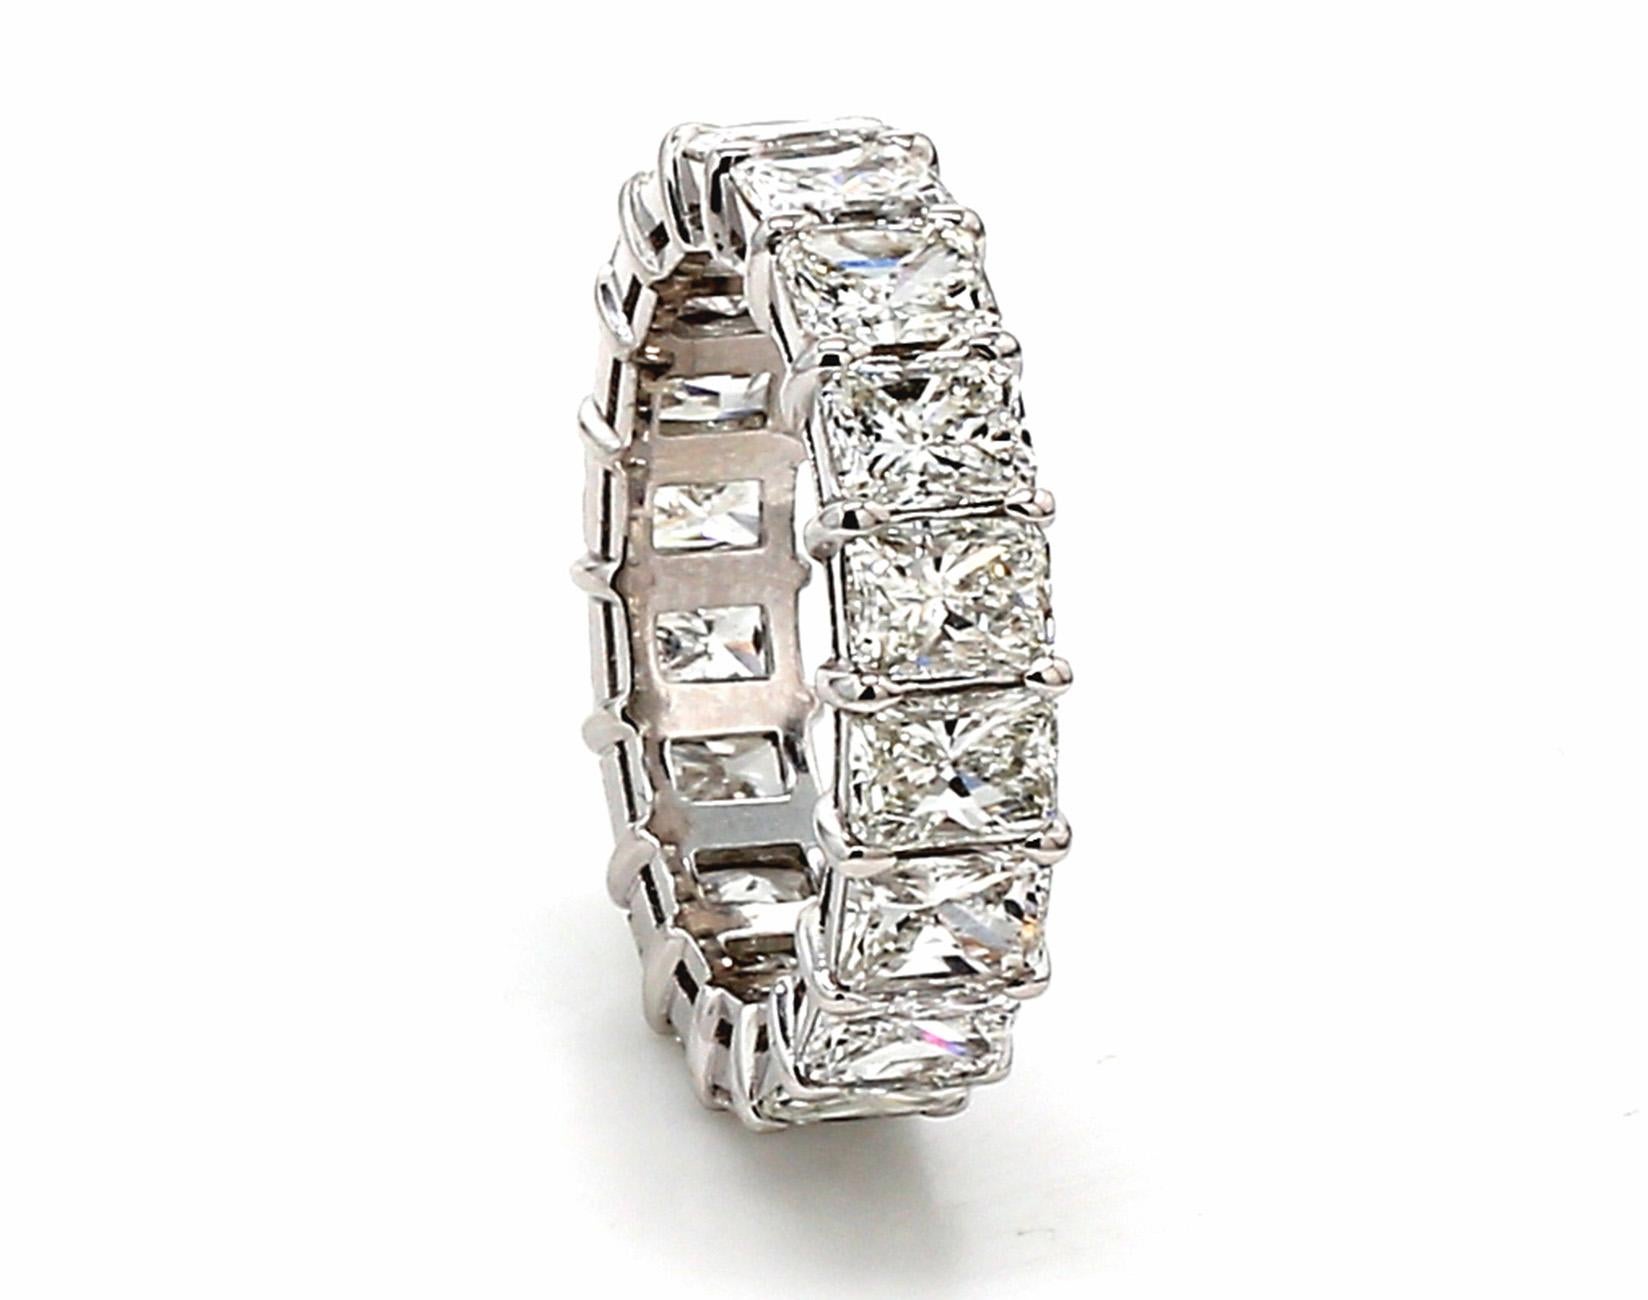 Eternity band in platinum with basket claw set GIA certified F-H/VS2-SI1 radiant cut diamonds. D5.83ct.t.w. - 18 stones - Size 5.25